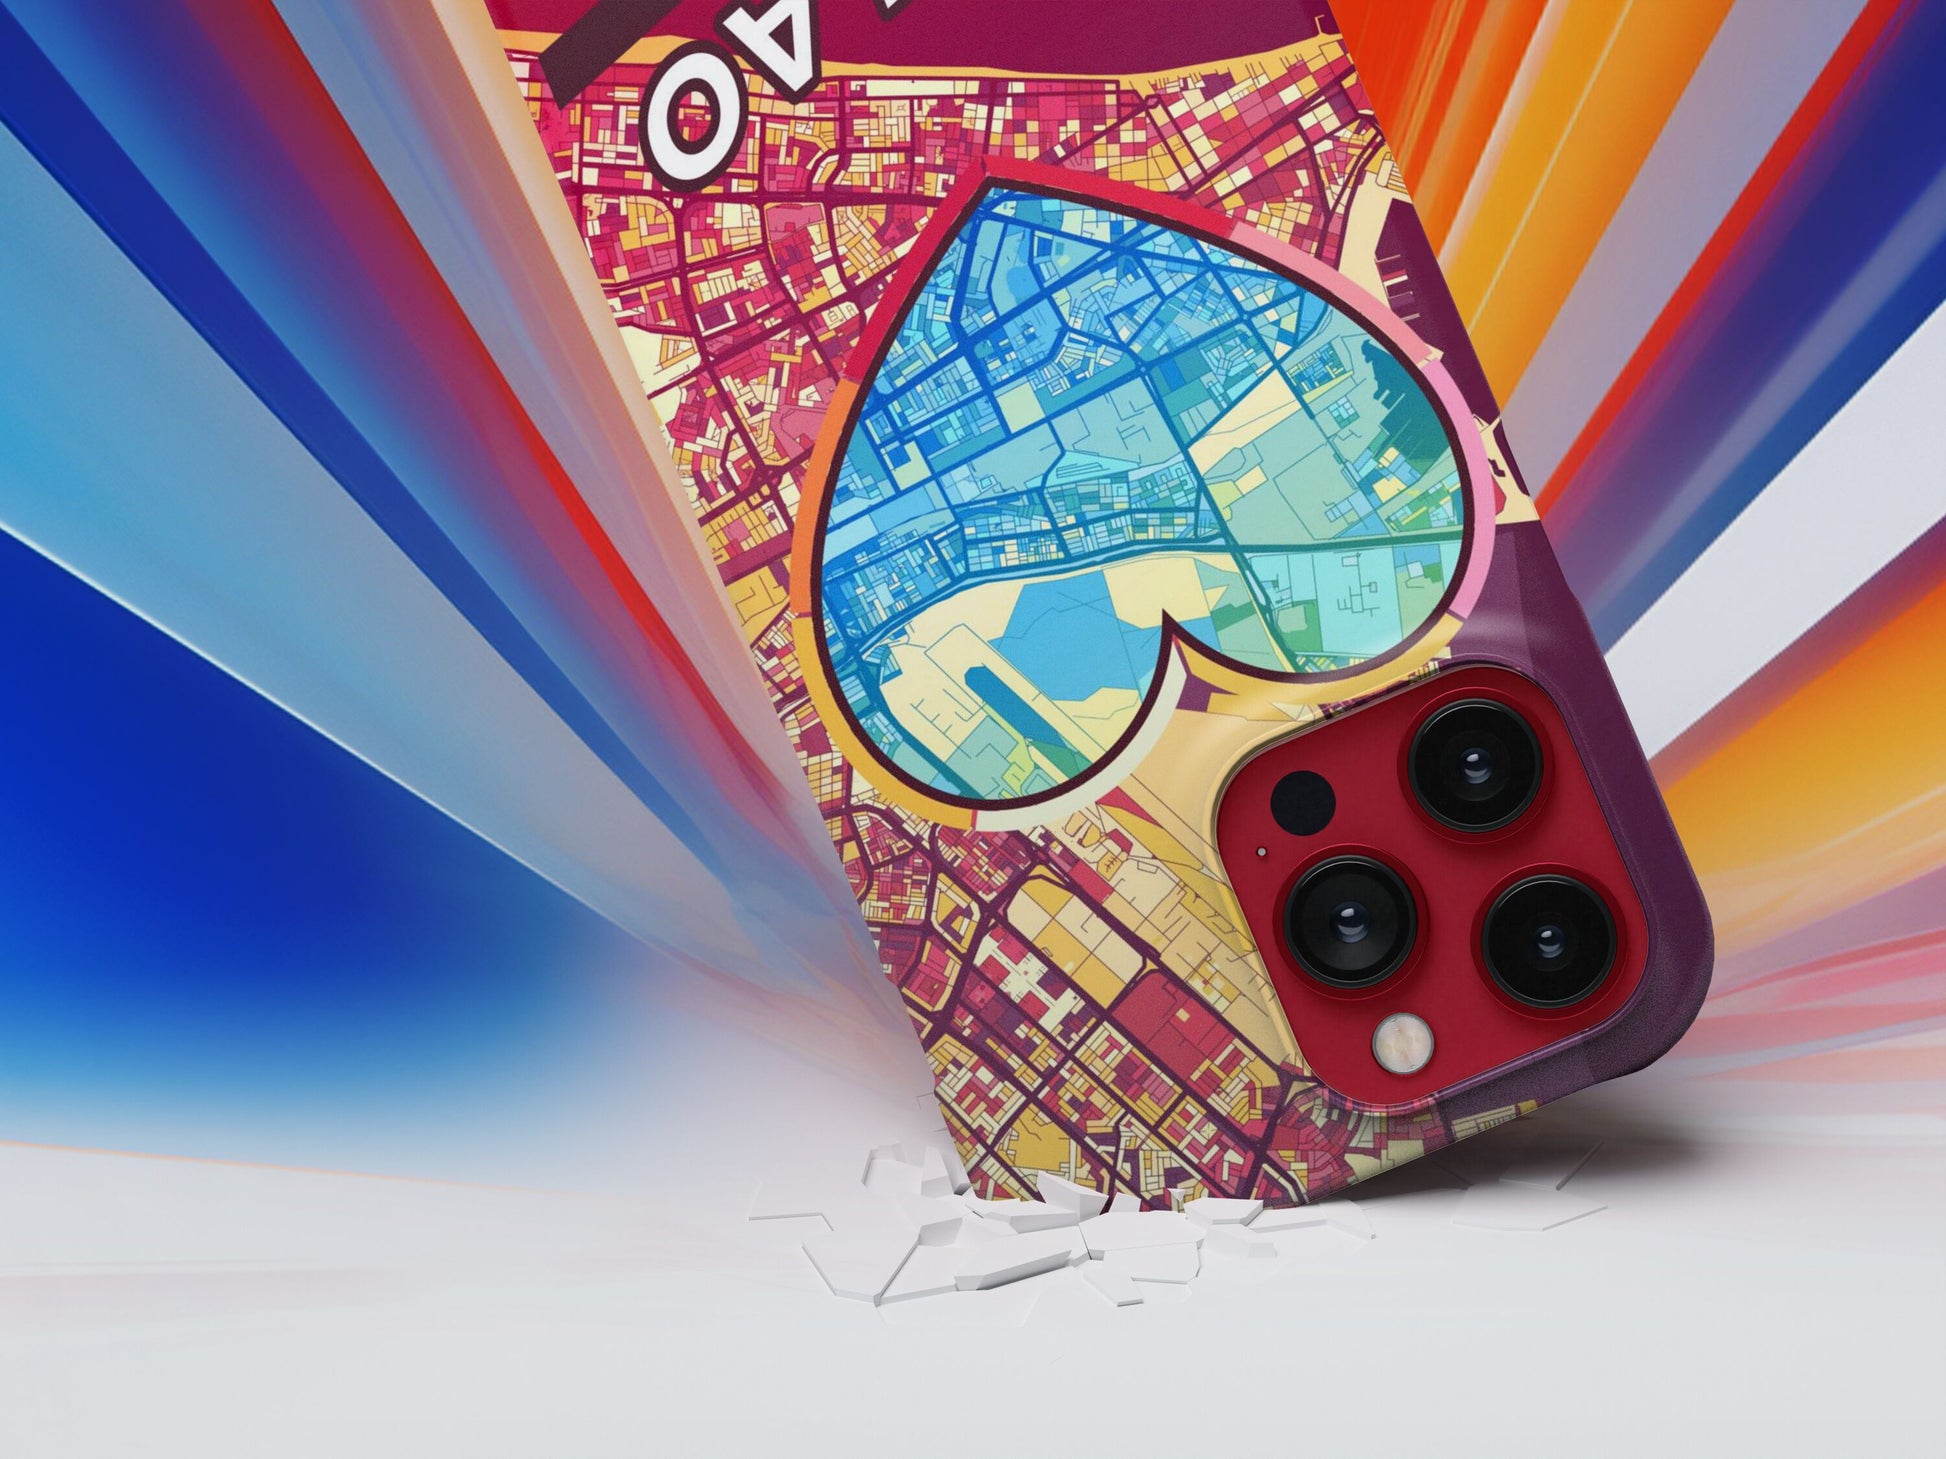 Callao Peru slim phone case with colorful icon. Birthday, wedding or housewarming gift. Couple match cases.